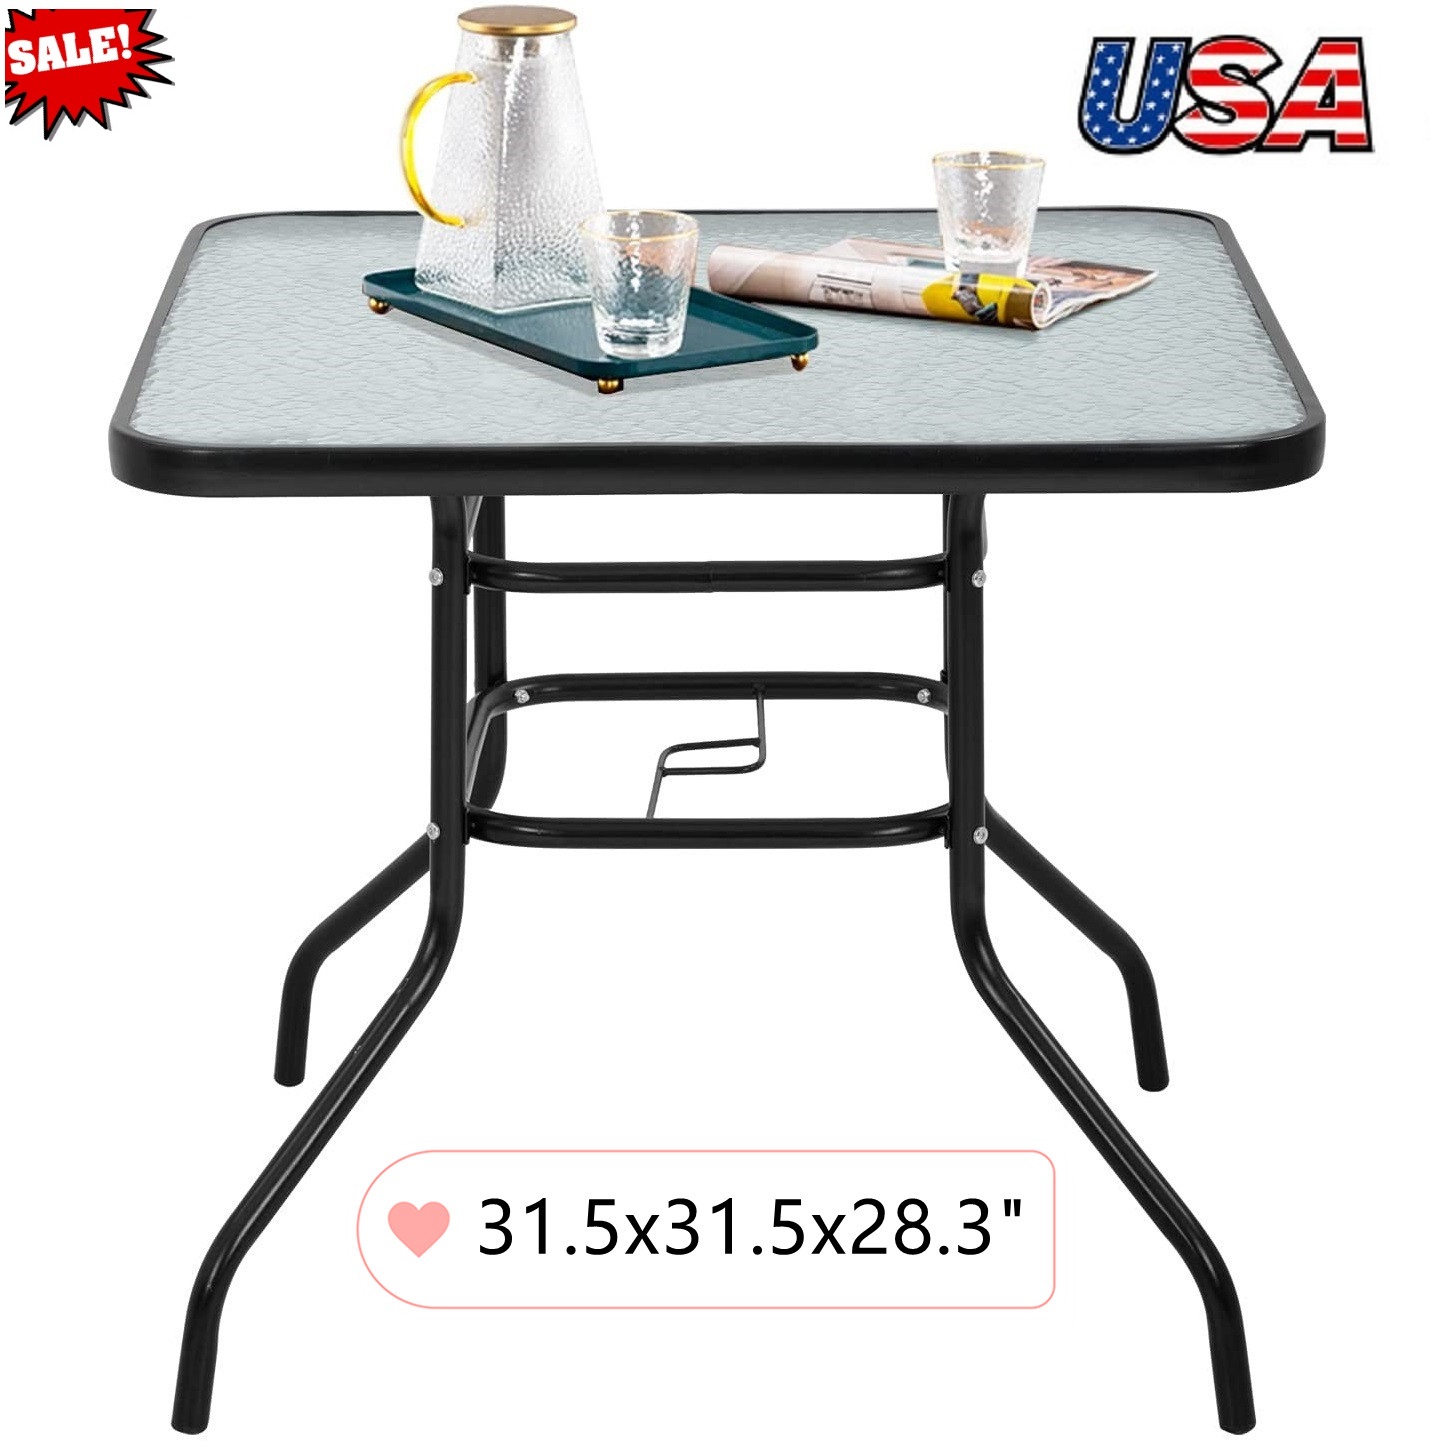 Goorabbit Outdoor Glass Table 32"Outdoor Bistro Table Square Patio Dining Table Side Table with Umbrella Hole, Outdoor Indoor Banquet Furniture with Metal Frame and Glass Top,Black - image 1 of 8